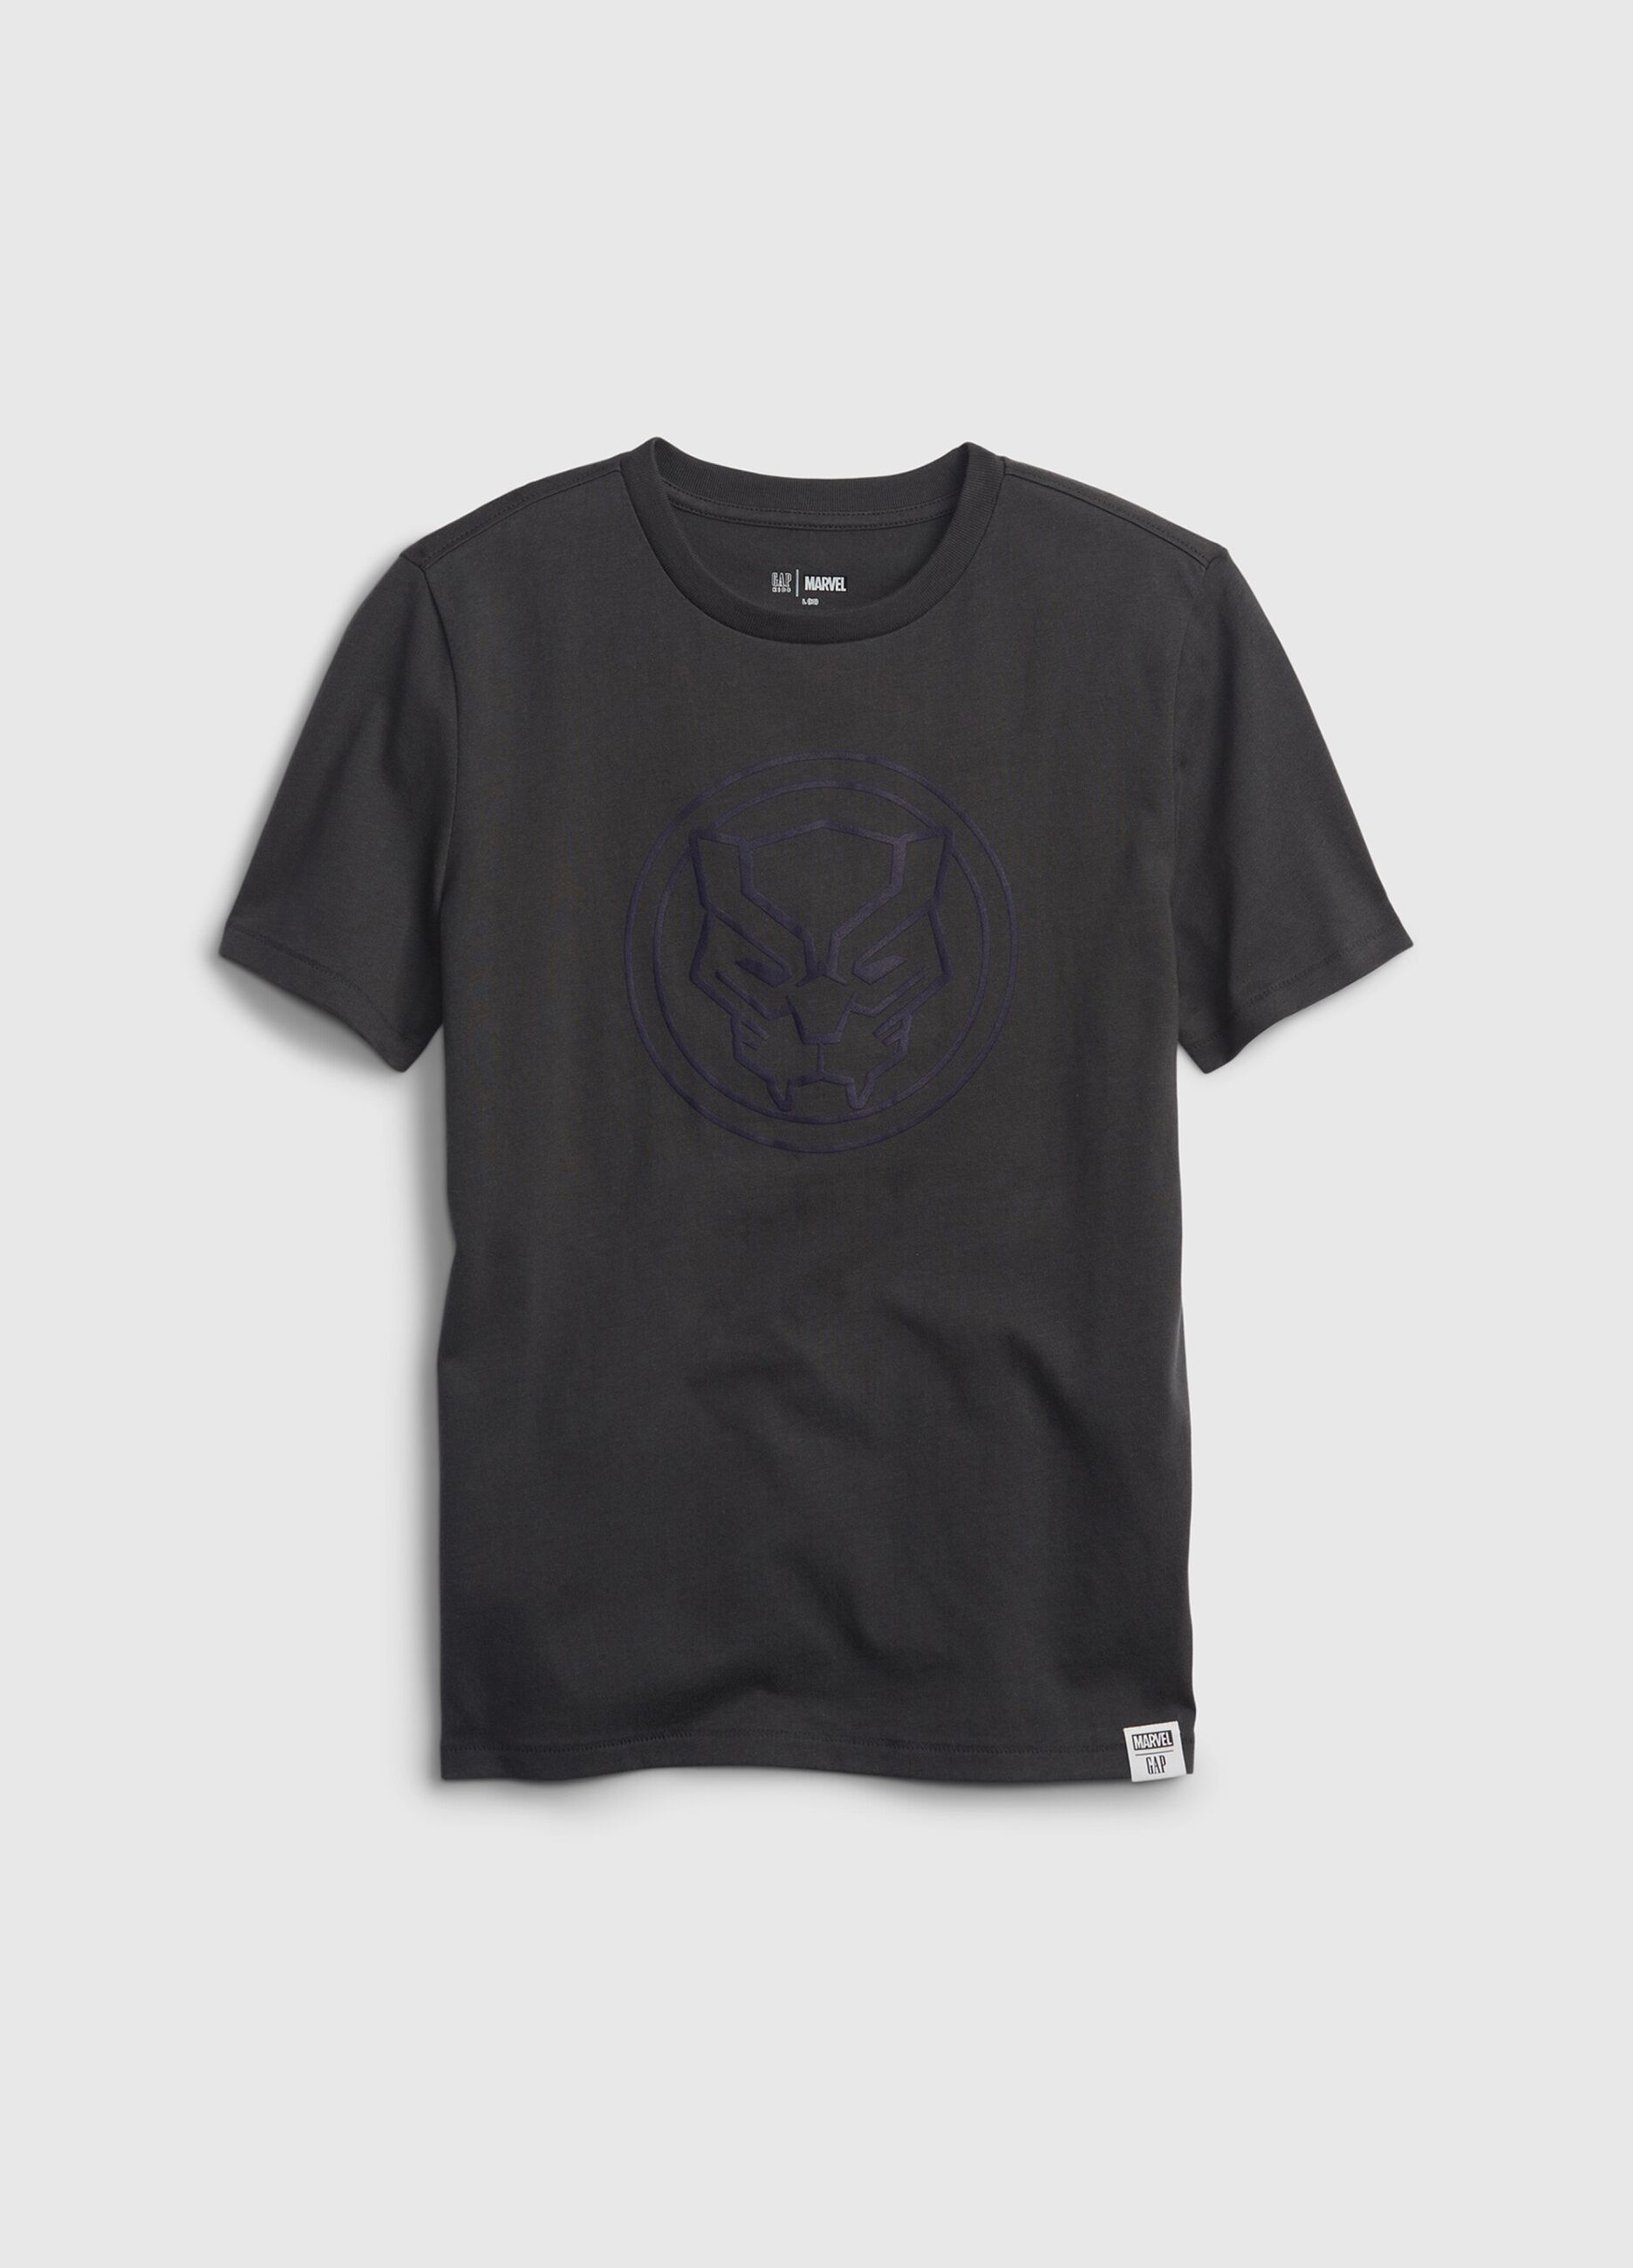 T-shirt in cotone con stampa Black Panther